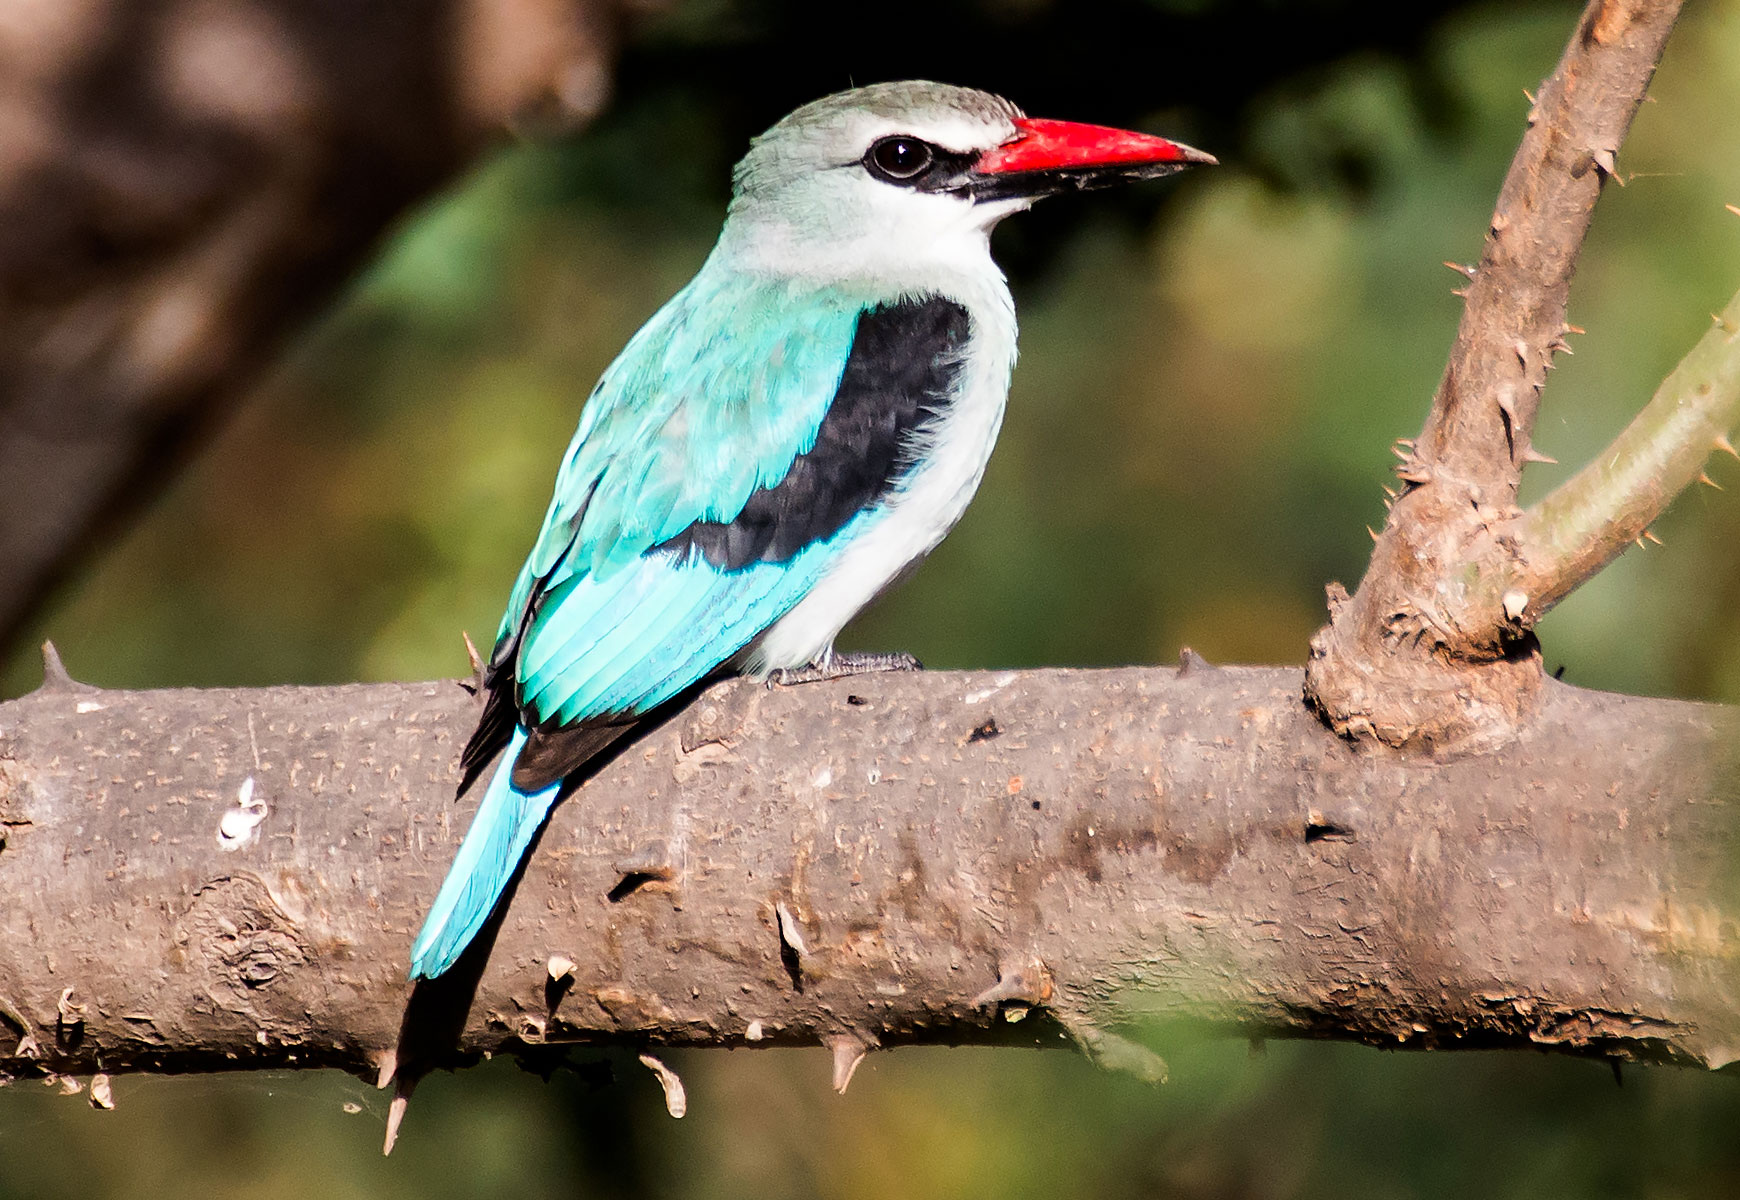 A woodland kingfisher sitting on a thick branch in Ethiopia. The bird has a gray and white head, a white breast, and a light blue back, and light blue and black wings and tail.